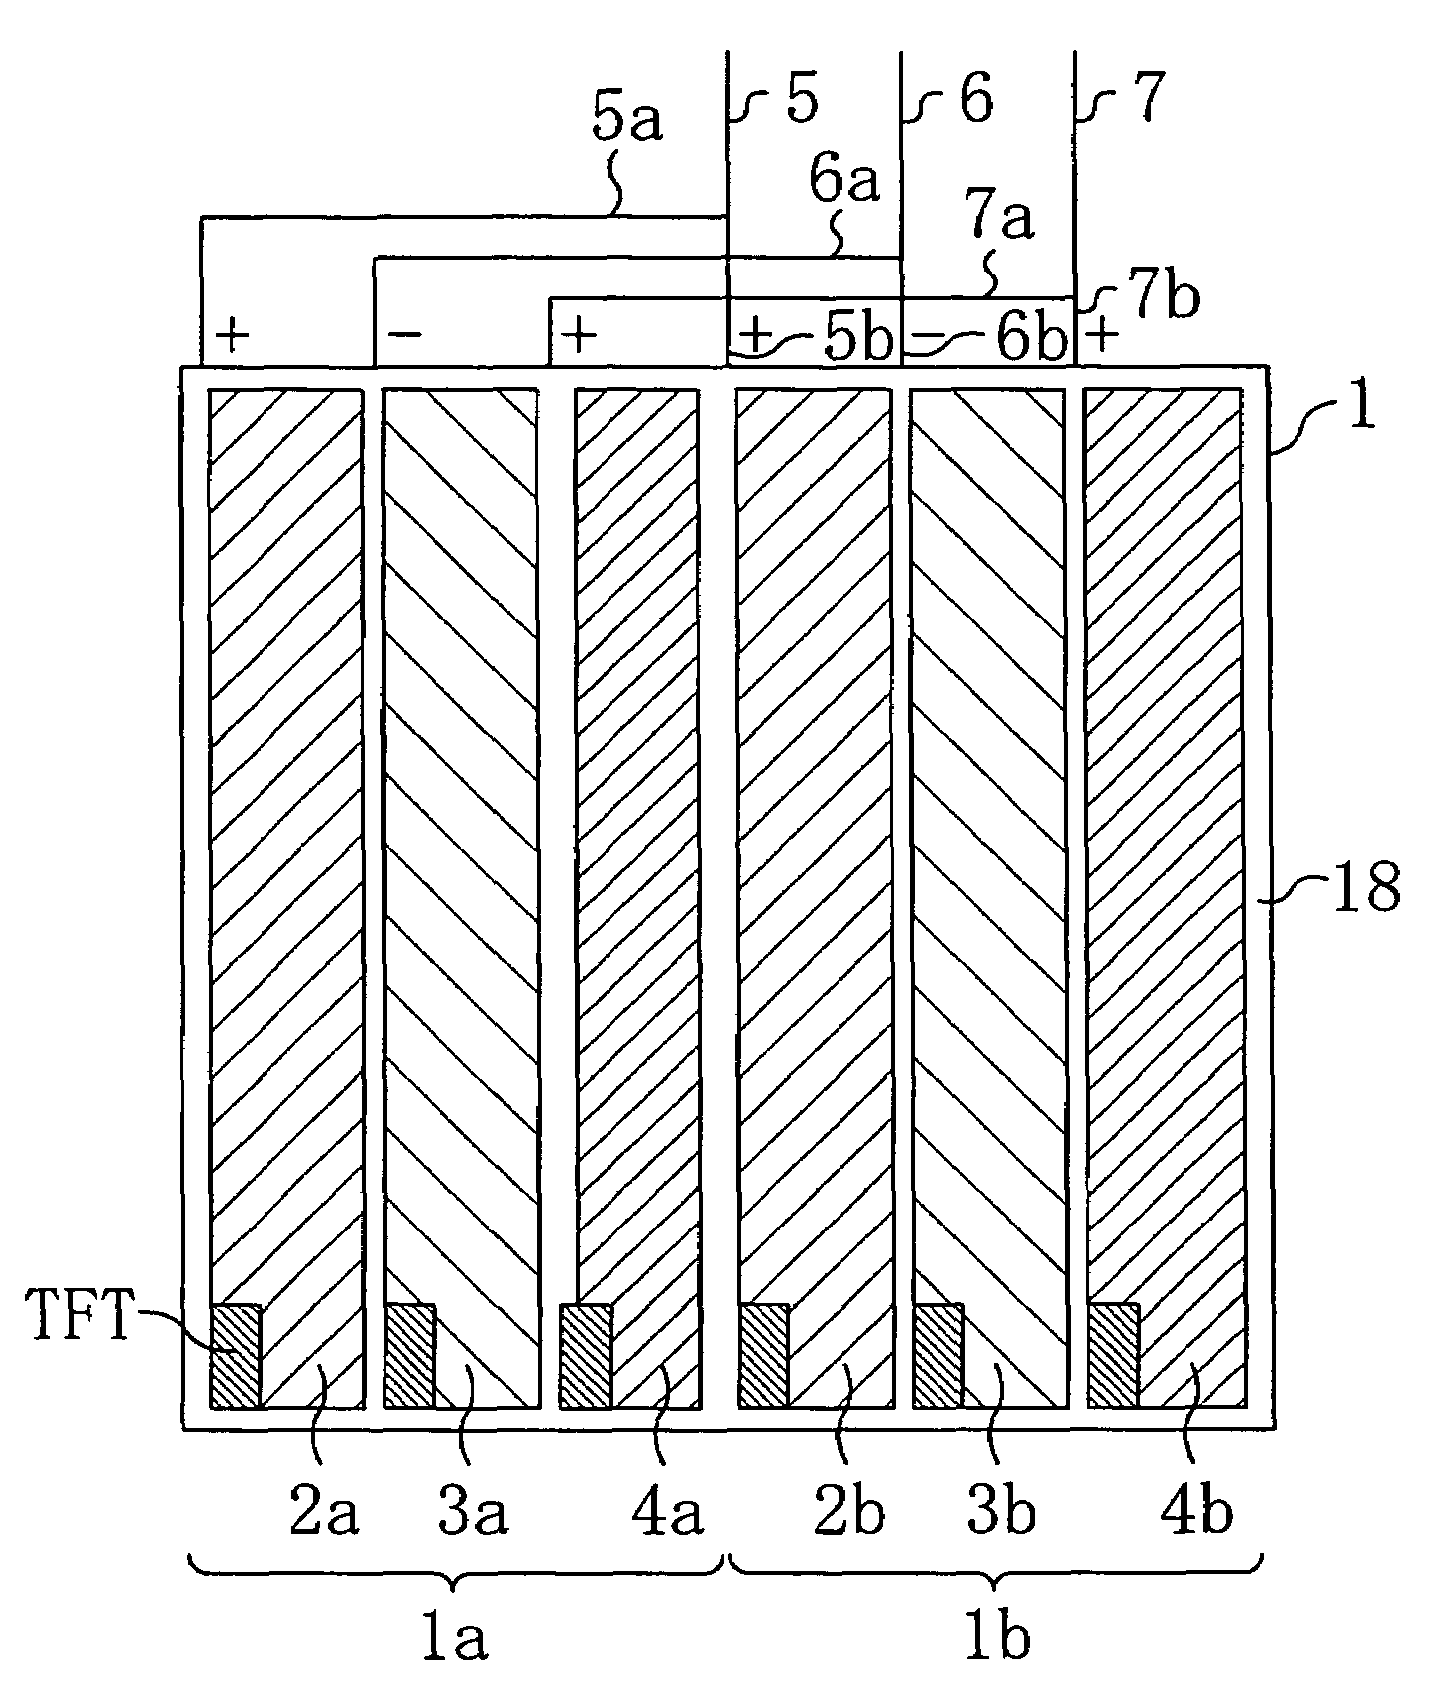 Display device having pixels including a plurality of sub-pixels